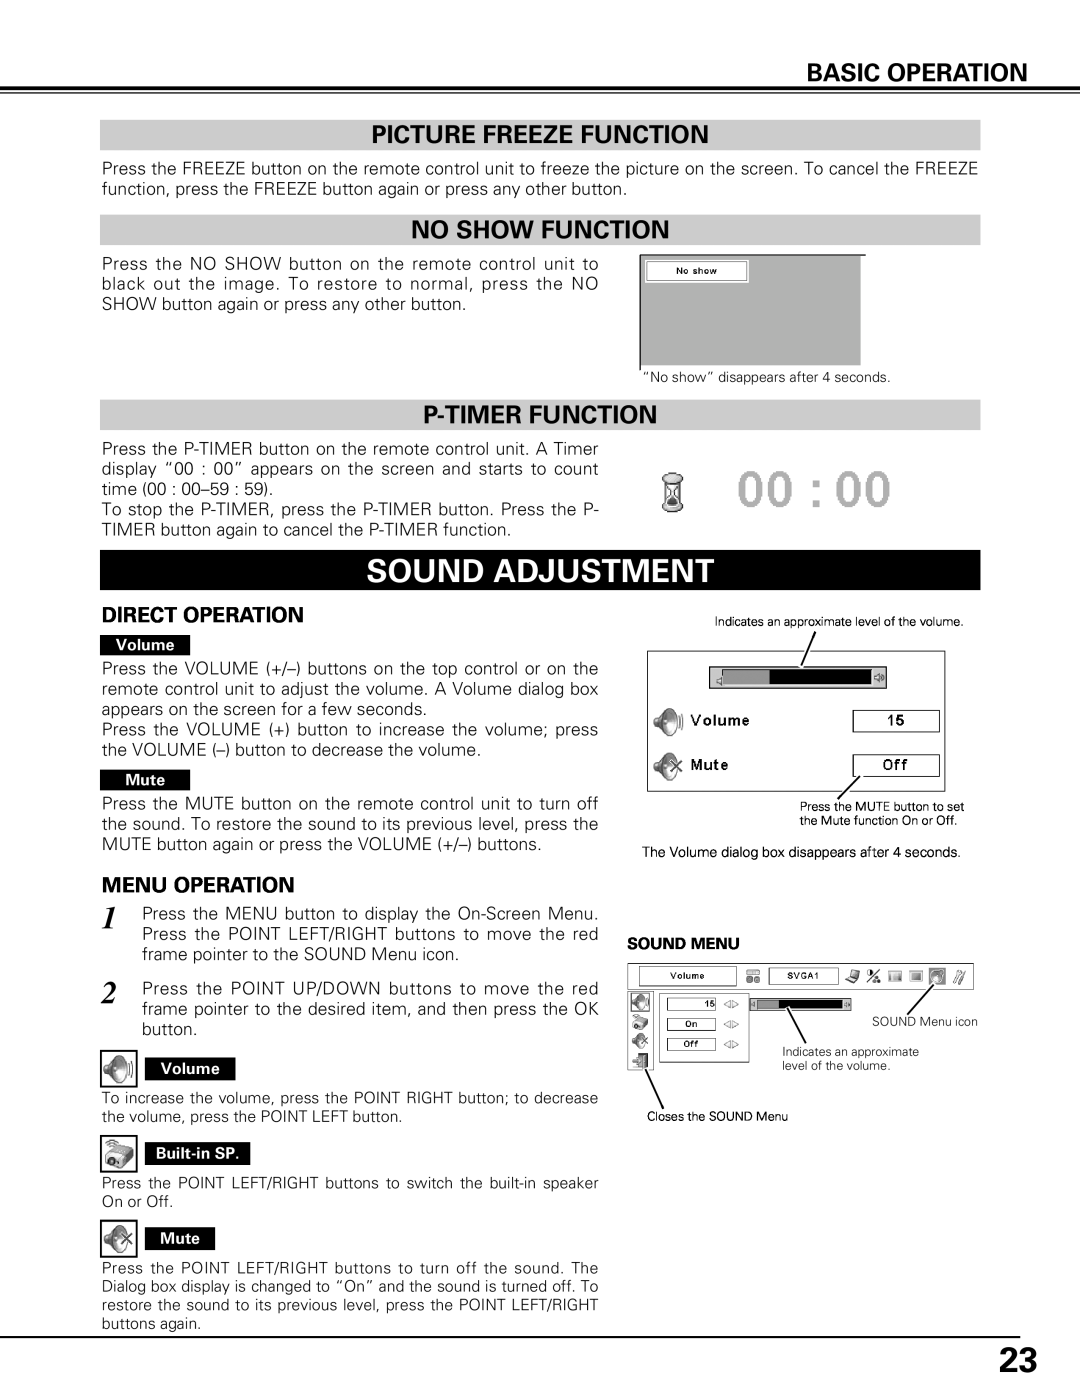 Canon LV-7575 user manual Sound Adjustment, Basic Operation Picture Freeze Function, No Show Function, P-Timer Function 